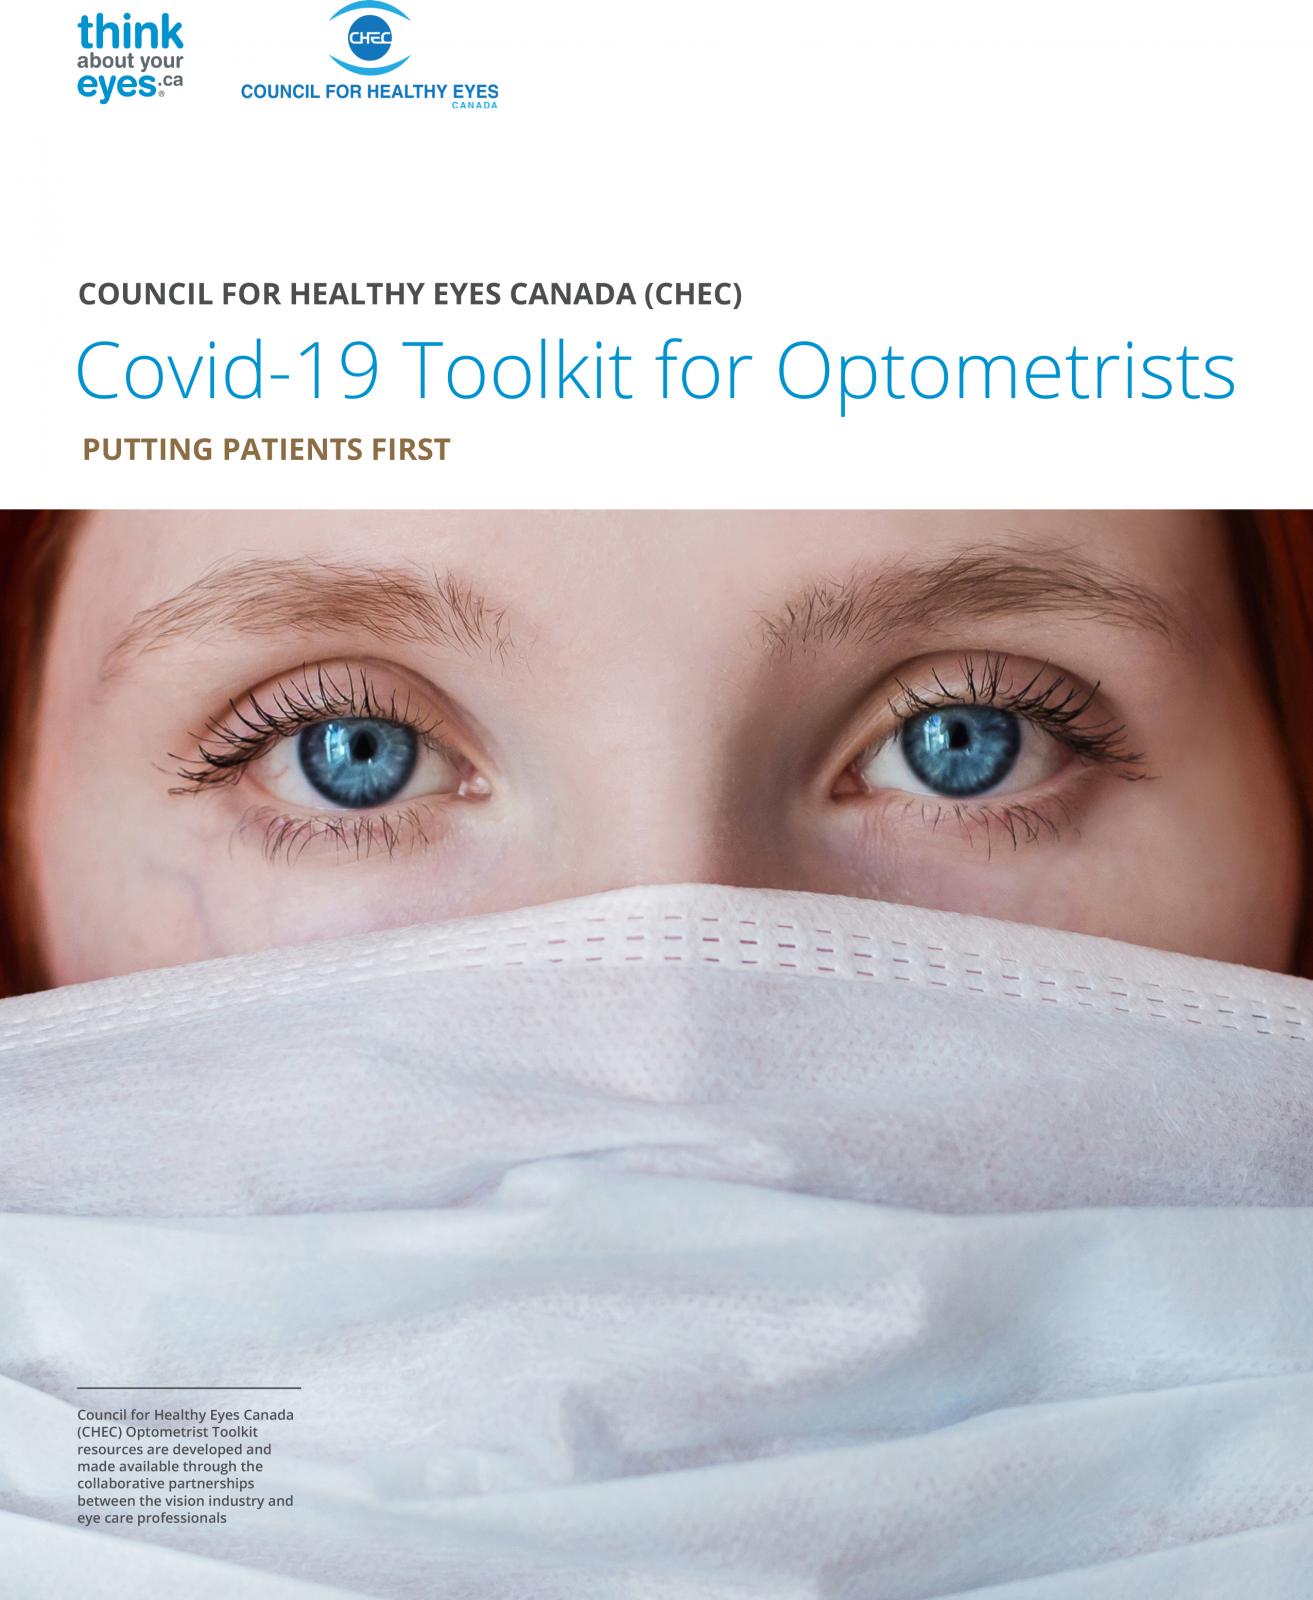 Covid-19 Toolkit for Optometrists - PUTTING PATIENTS FIRST